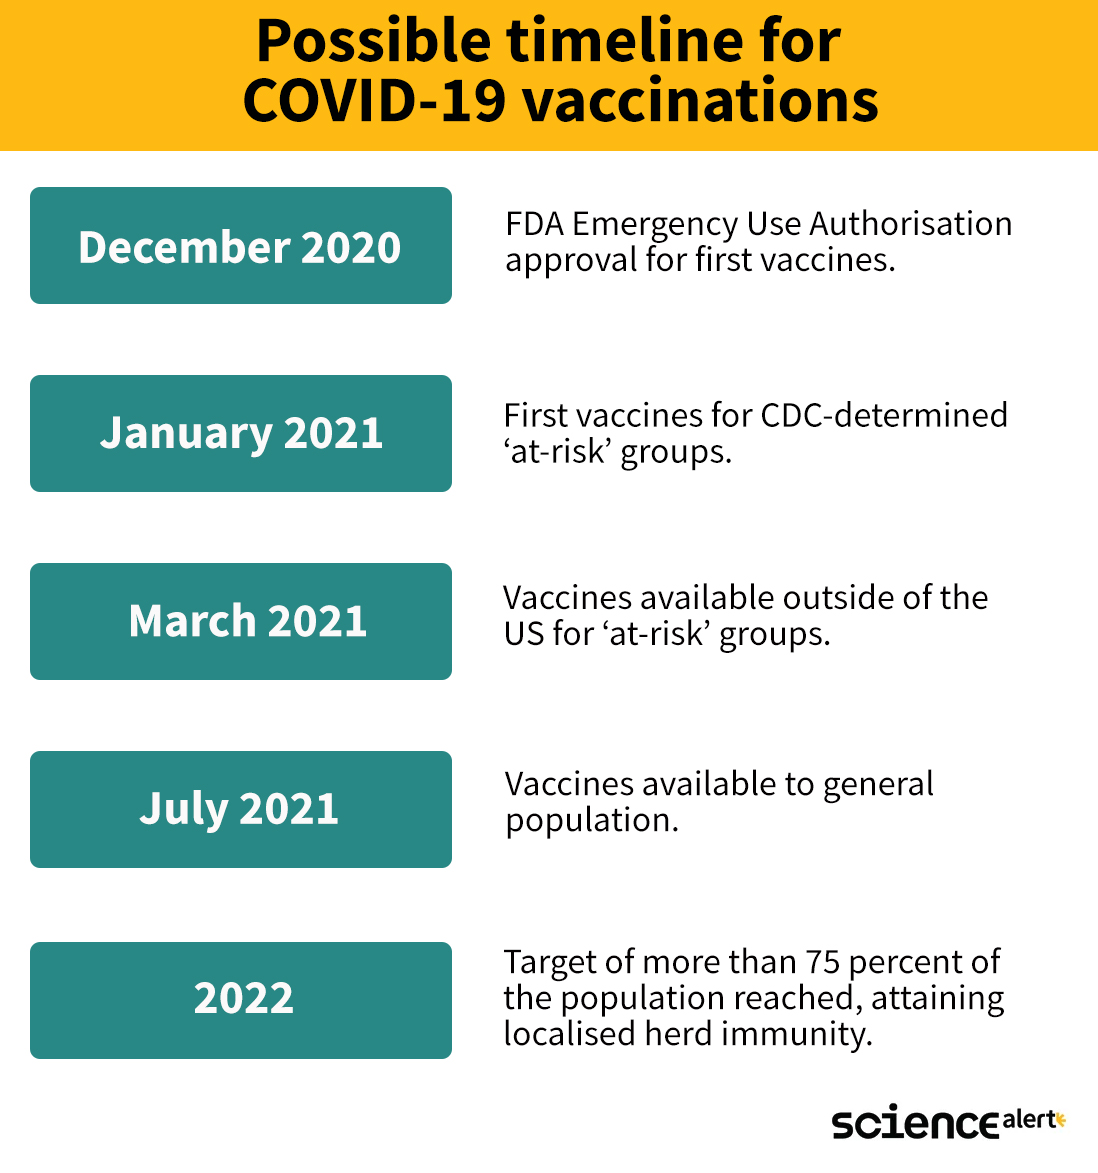 covid symptoms timeline with vaccine